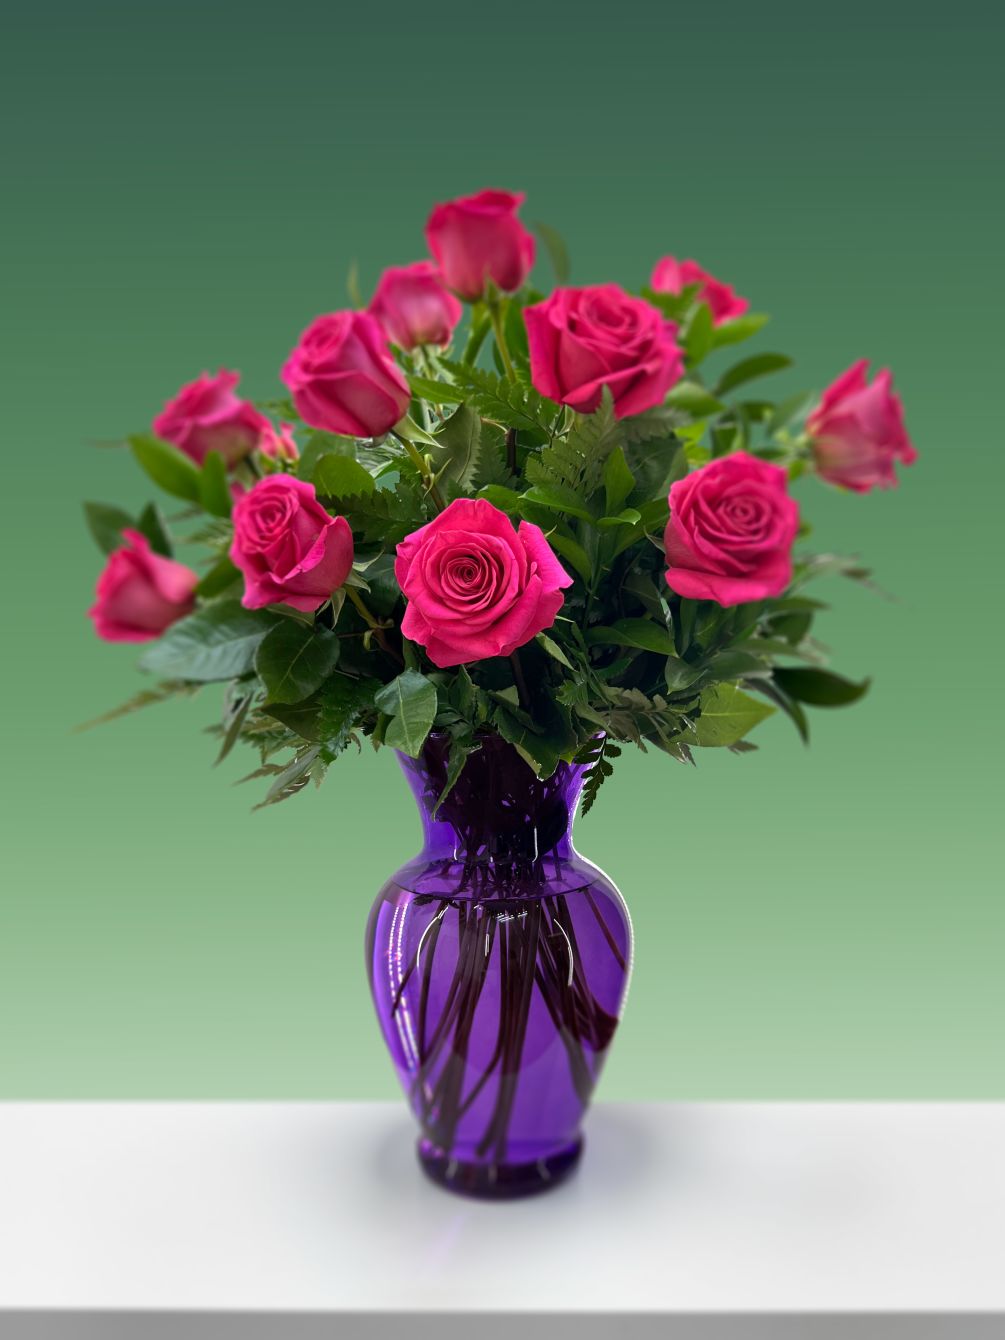 Surprise someone with these Hot Pink Roses arranged in a vase.